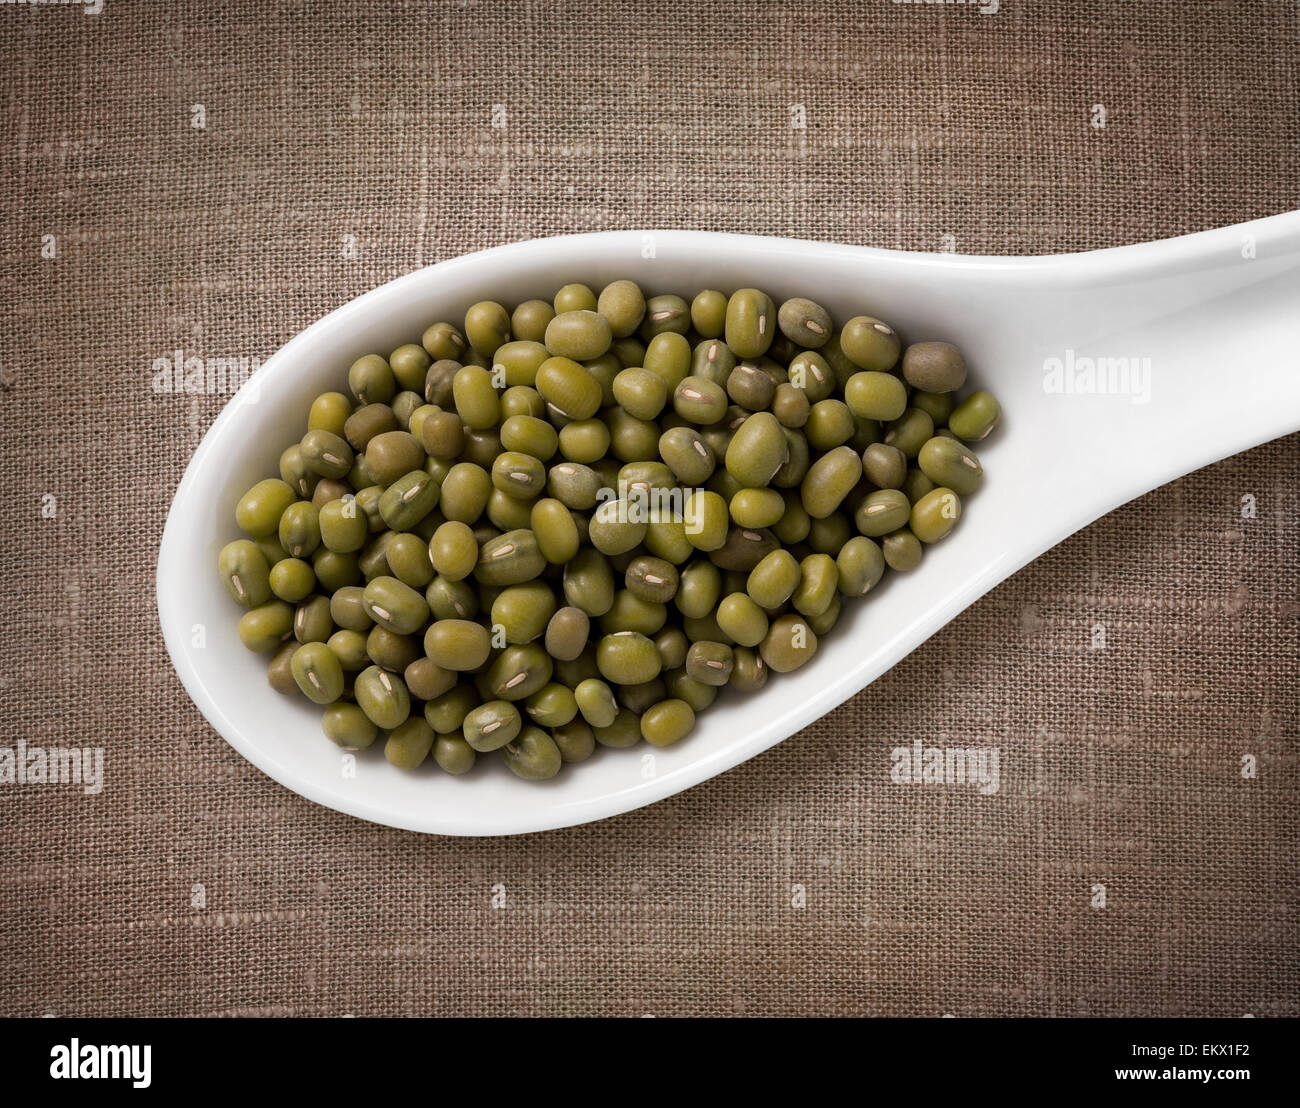 Mung beans in a wooden spoon / high-res photo of grain in white porcelain spoon on burlap sackcloth background Stock Photo